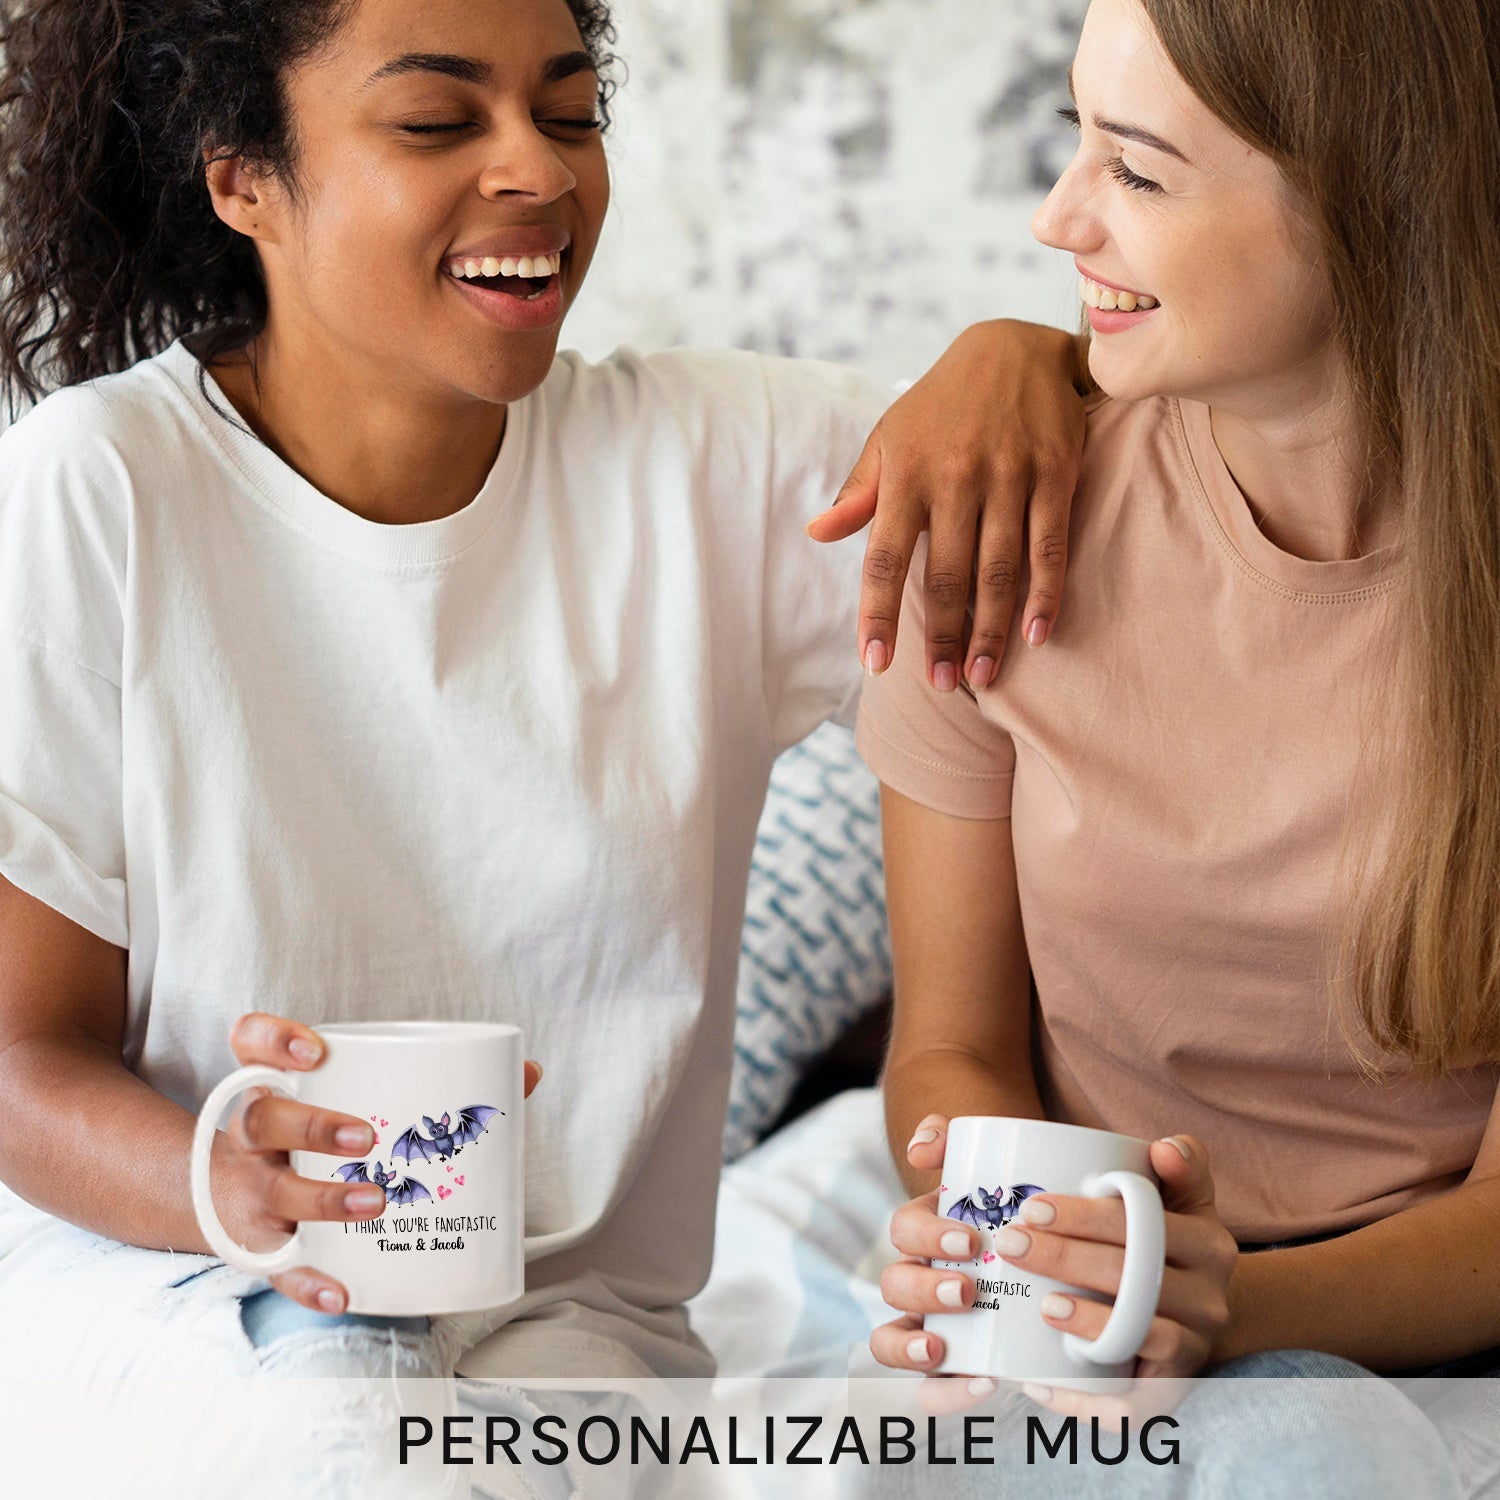 I Think You're Fangtastic - Personalized Anniversary or Halloween gift for Boyfriend or Girlfriend - Custom Mug - MyMindfulGifts